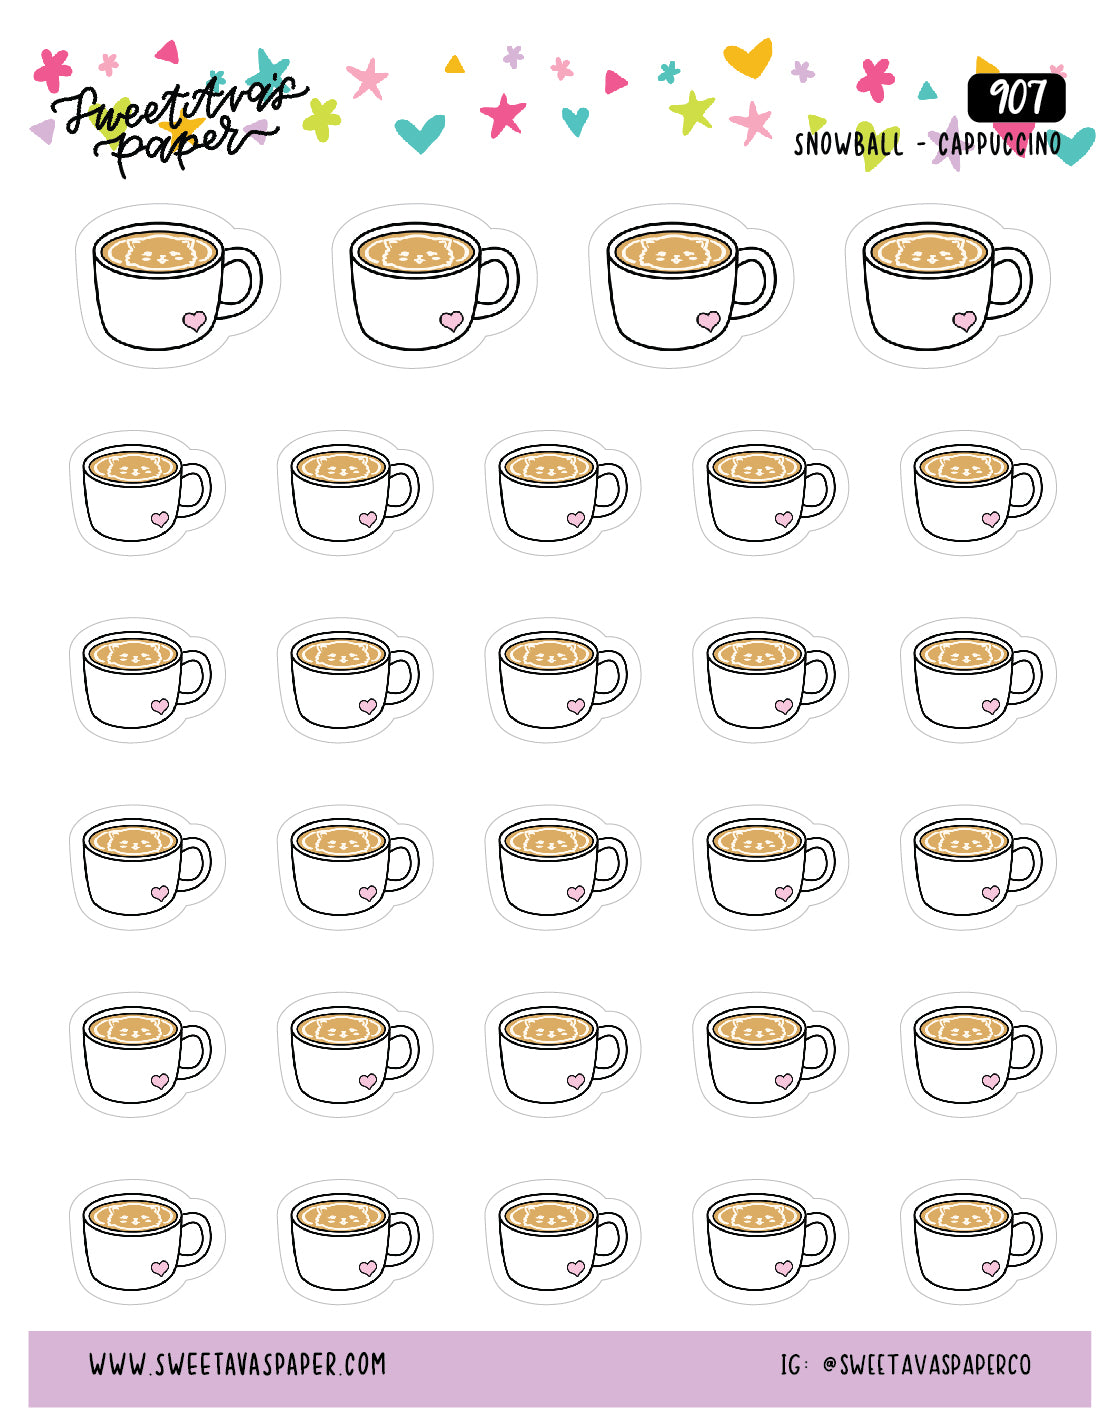 Cappuccino Planner Stickers - Cat Shaped Icons - Snowball The Cat [907]